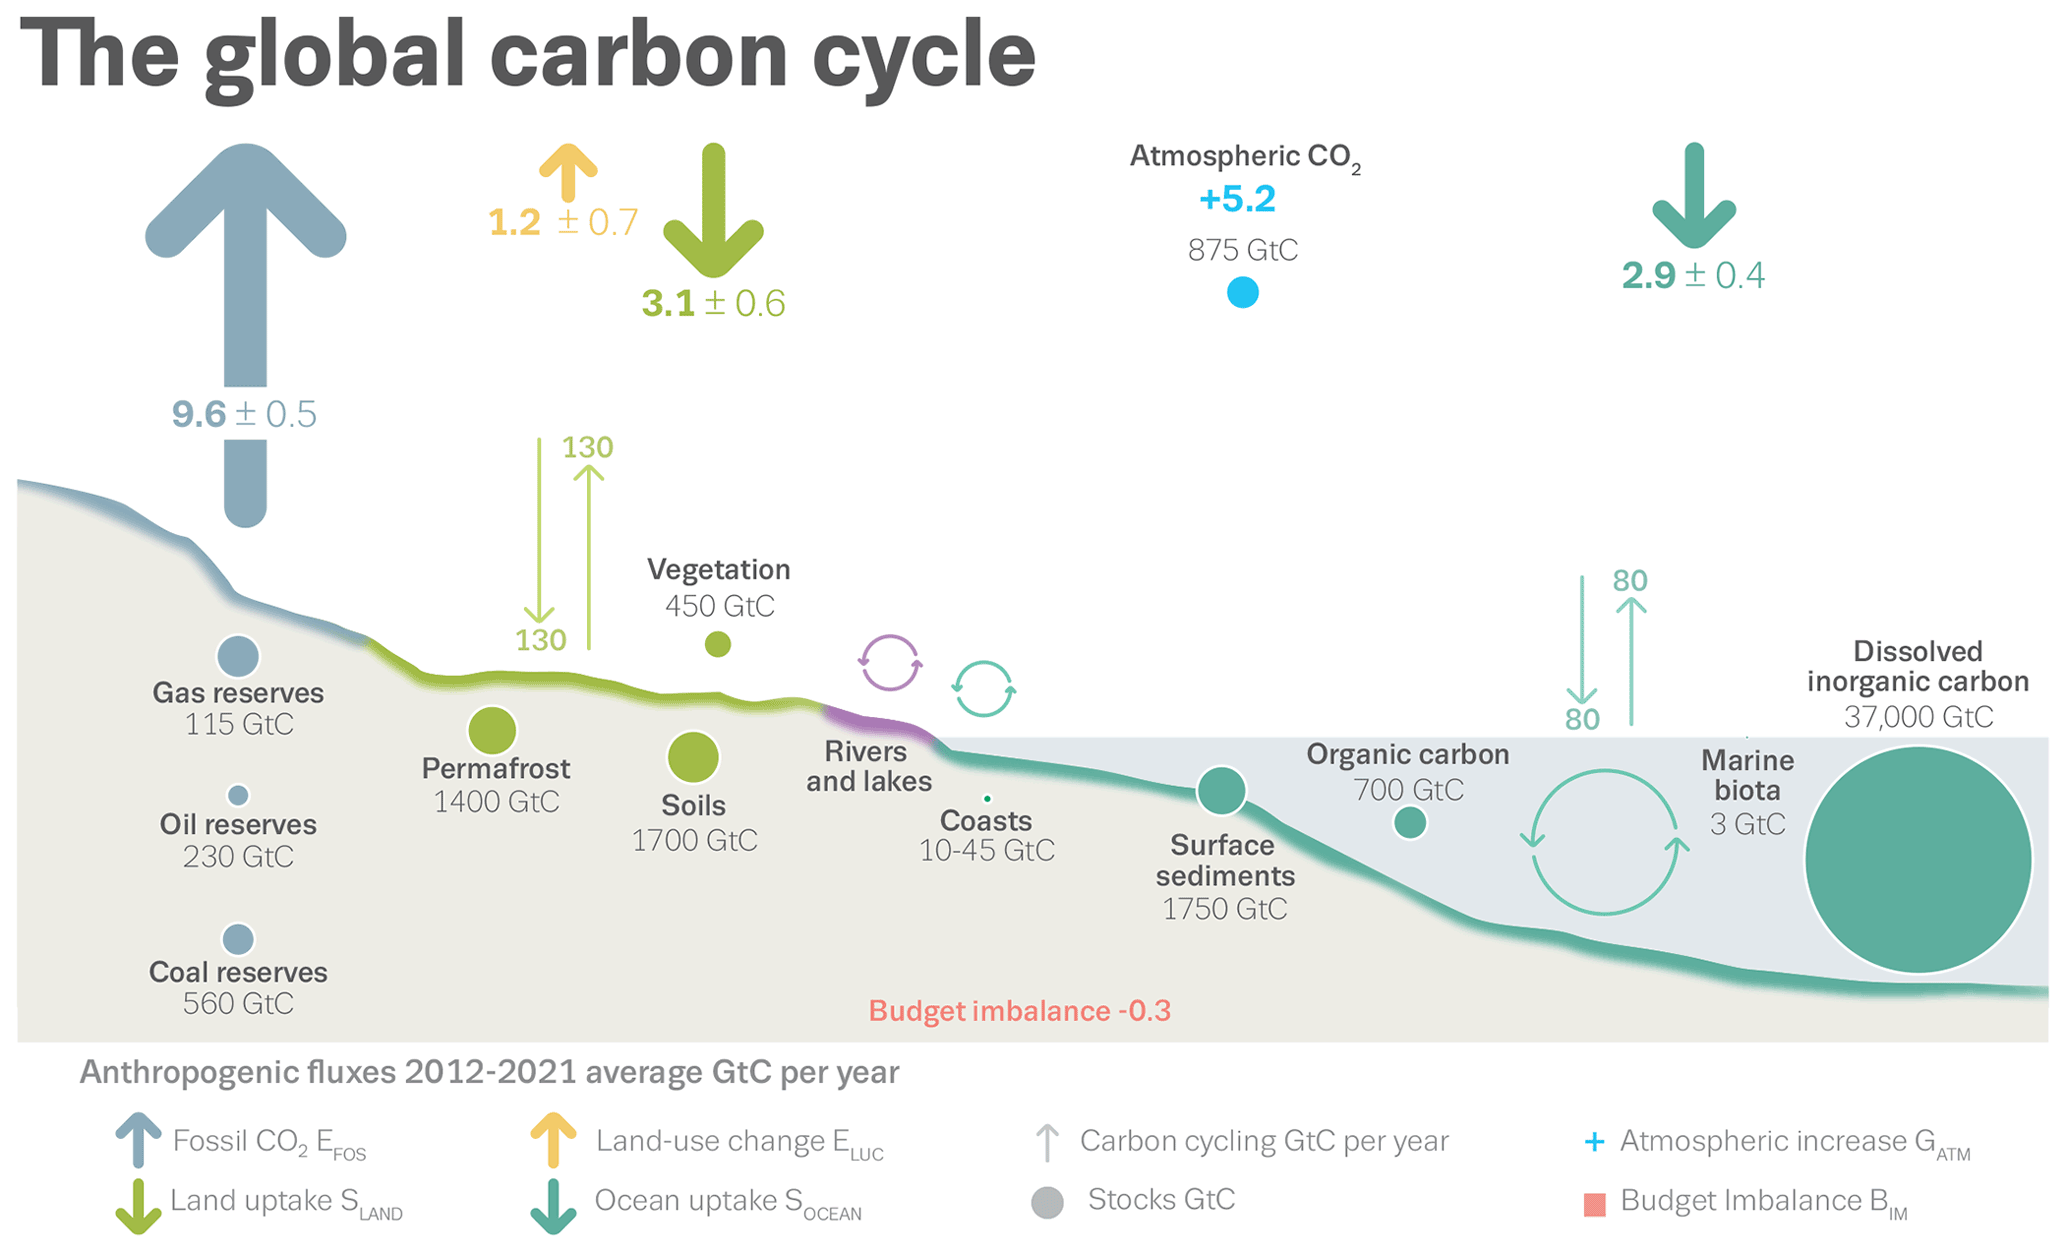 Schematic representation of the overall perturbation of the global carbon cycle caused by anthropogenic activities, averaged globally for the decade 2012-2021. See legends for the corresponding arrows and units. The uncertainty in the atmospheric CO2 growth rate is very small (±0.02 Gt C yr-1) and is neglected for the figure. 